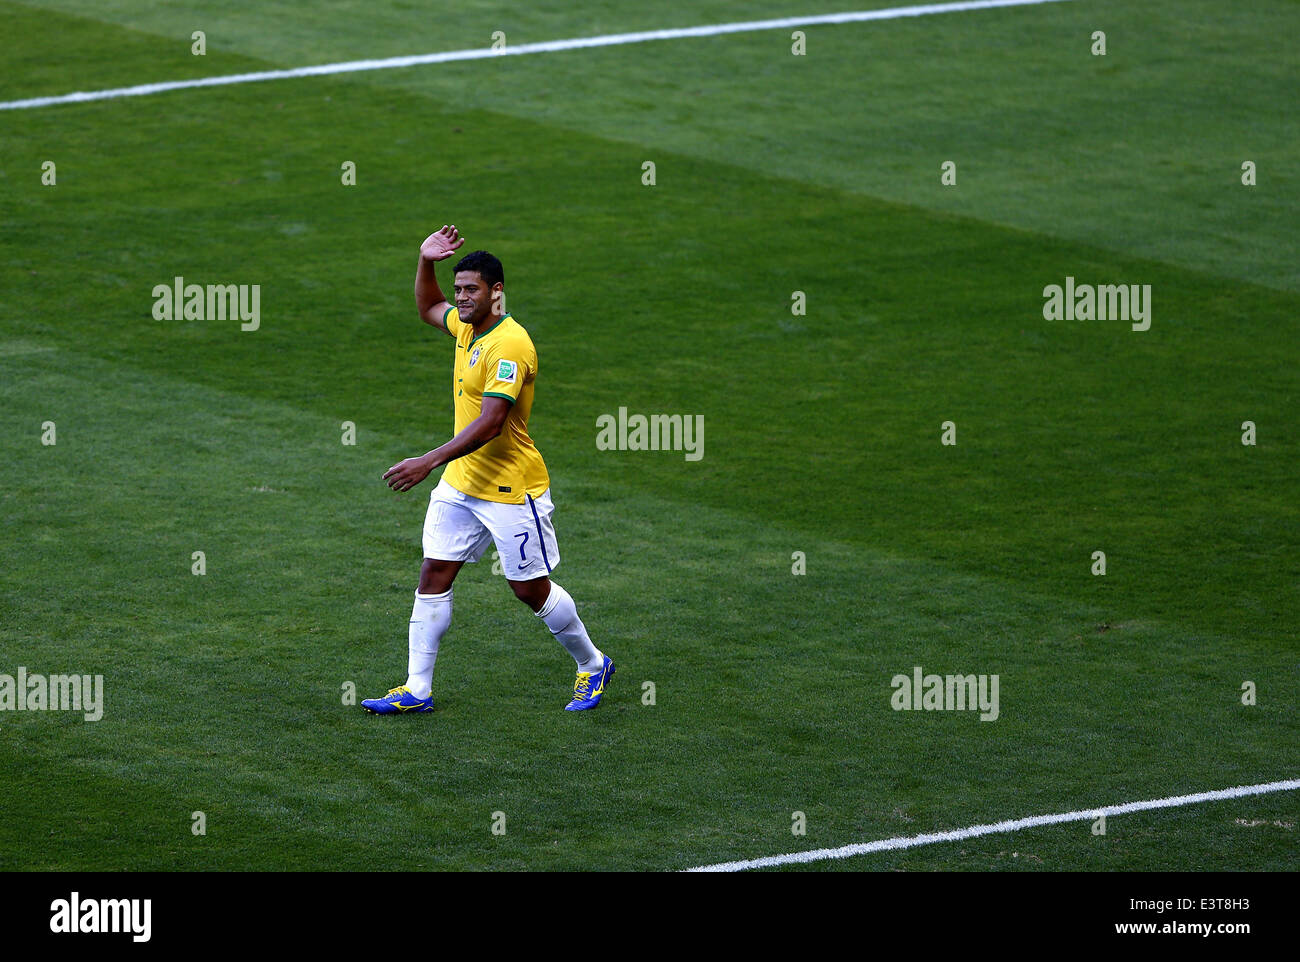 Belo Horizonte, Brazil. 28th June, 2014. Brazil's Hulk reacts as his goal being nullified during a Round of 16 match between Brazil and Chile of 2014 FIFA World Cup at the Estadio Mineirao Stadium in Belo Horizonte, Brazil, on June 28, 2014. Credit:  Liu Bin/Xinhua/Alamy Live News Stock Photo